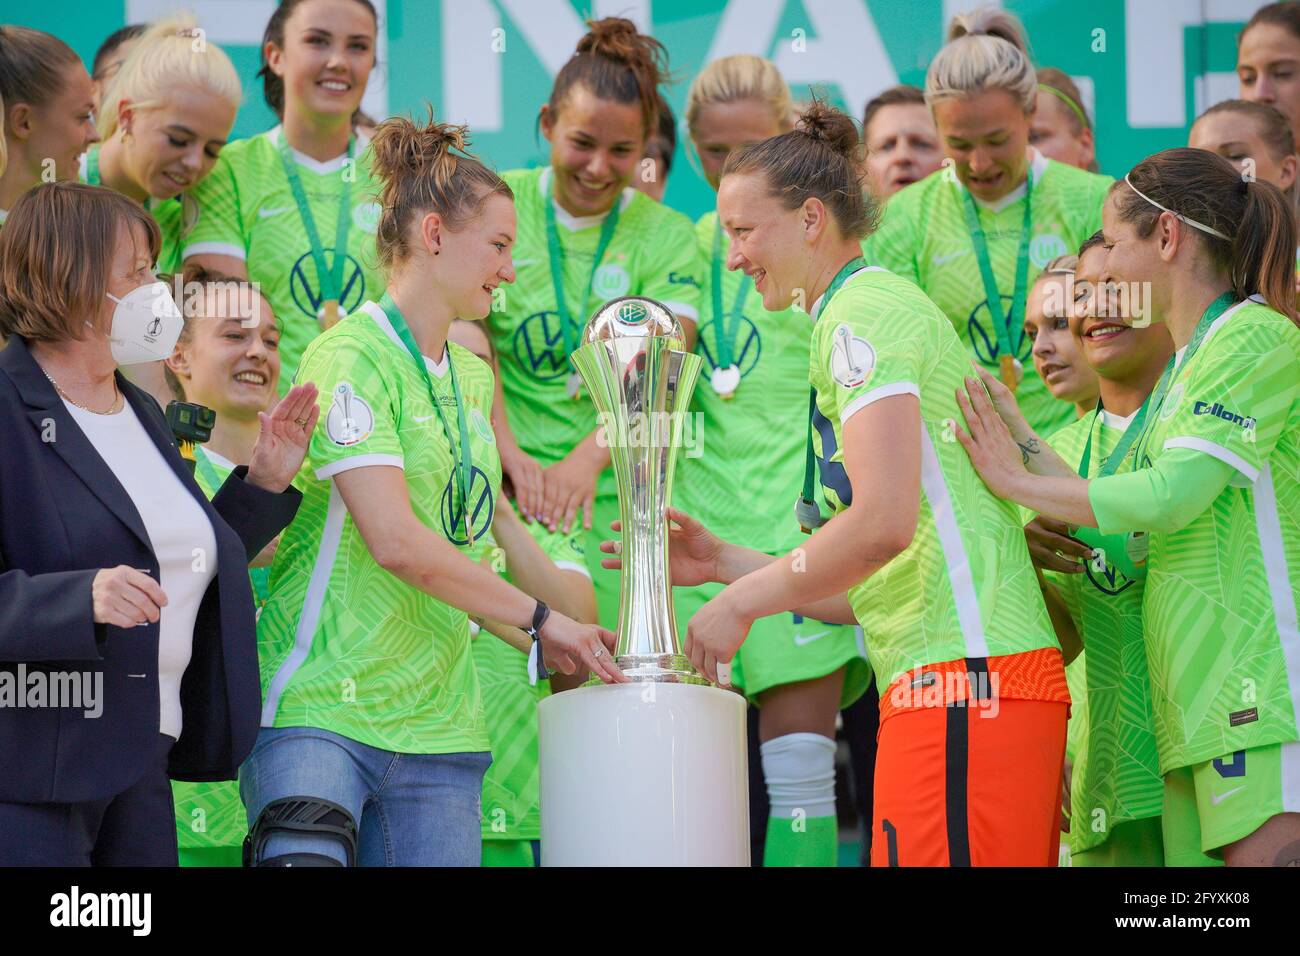 Cologne, Germany. 30th May, 2021. Vfl Wolfsburg celebrate their winning of the DFB Pokal (here Alexandra Popp and Almuth Schult with the trophy) at the DFB Women Cup Final match between Eintracht Frankfurt and VfL Wolfsburg at RheinEnergieSTADION in Cologne, Germany. Credit: SPP Sport Press Photo. /Alamy Live News Stock Photo